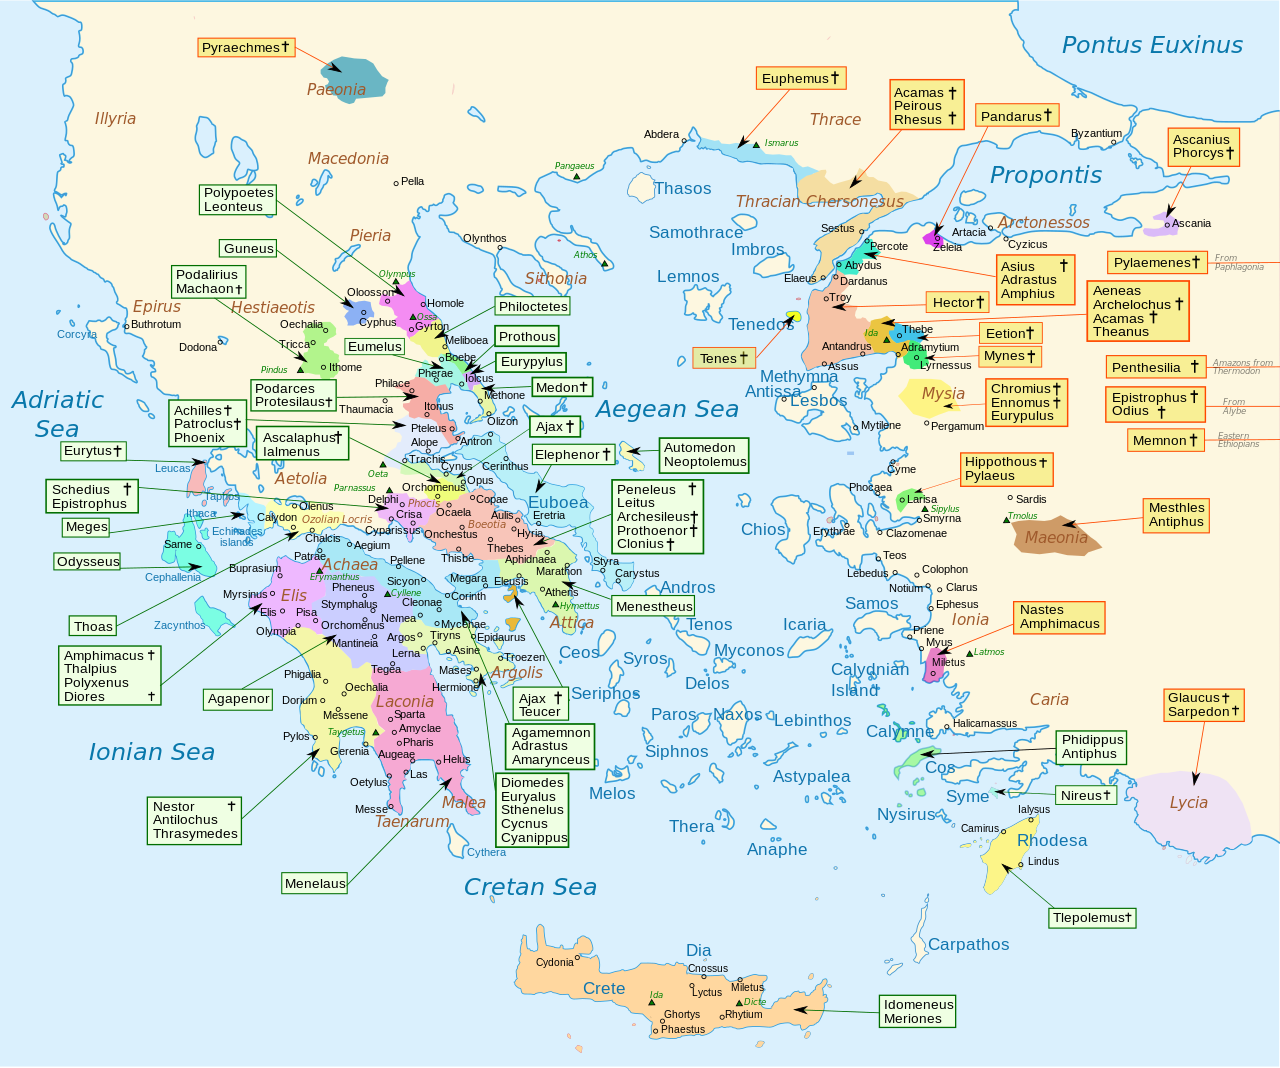 a map of Greece with labels where all the contingents in the catalogue of shops come from